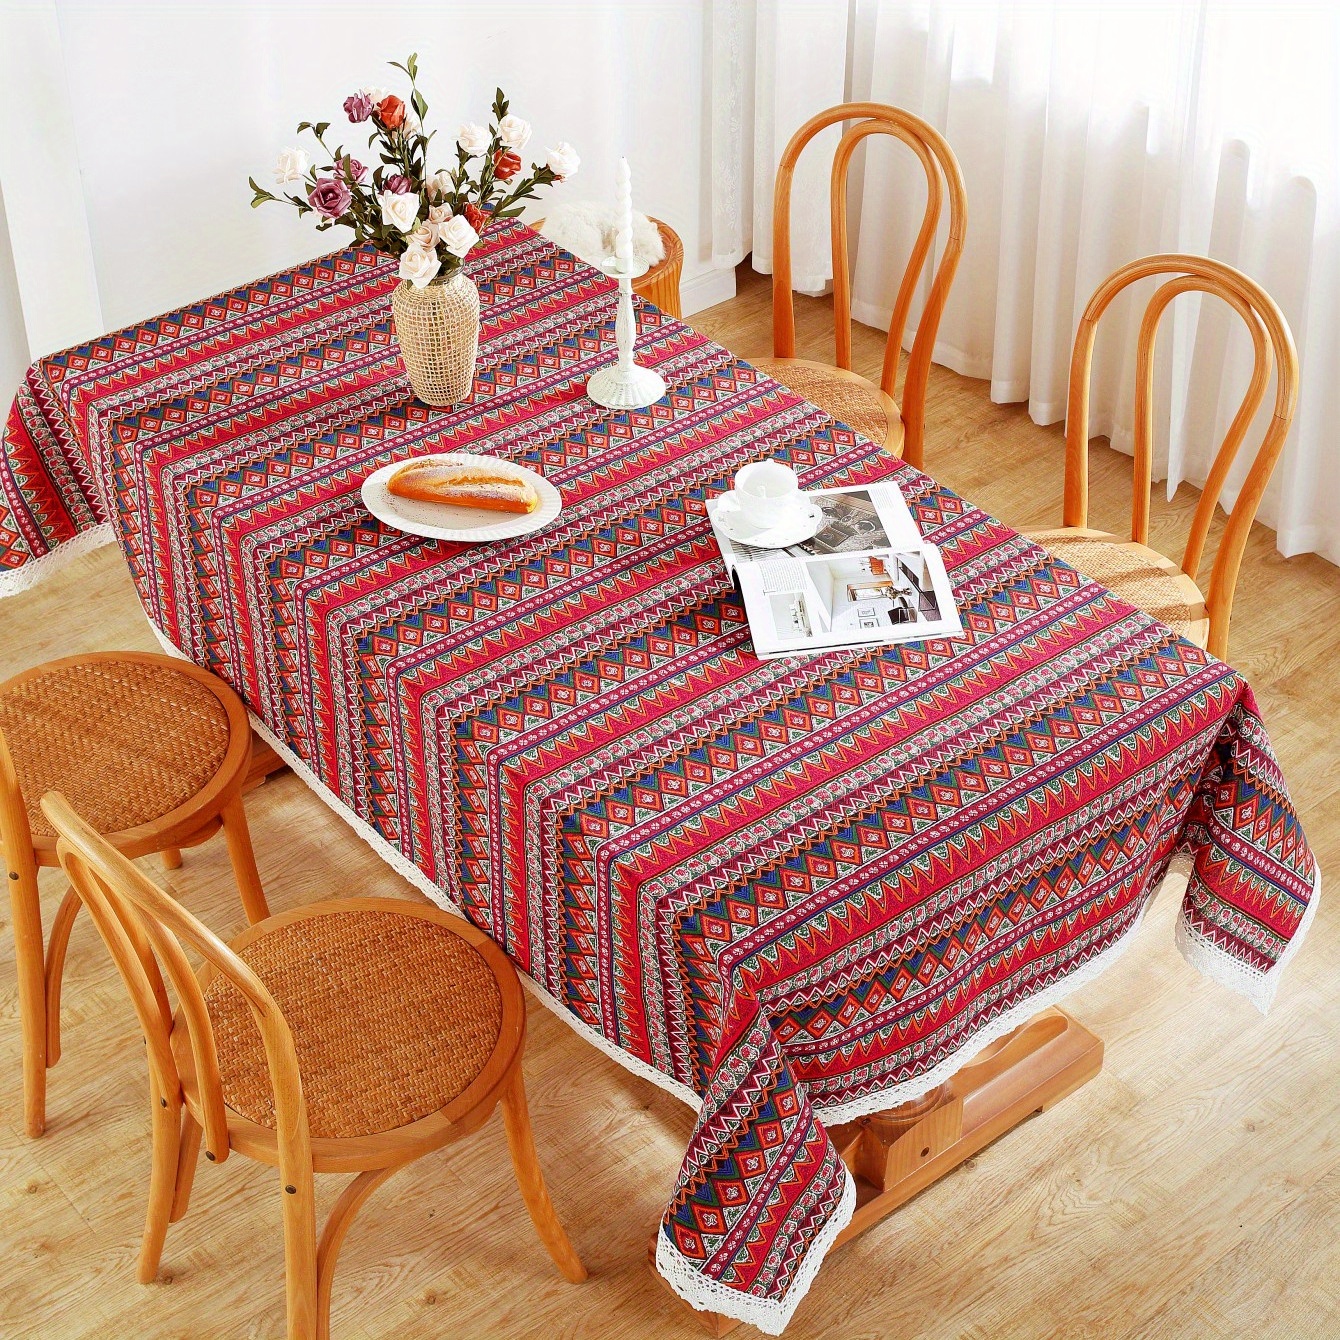 MACRAME PATTERN / Table Runner / Table Cloth / Table Cover